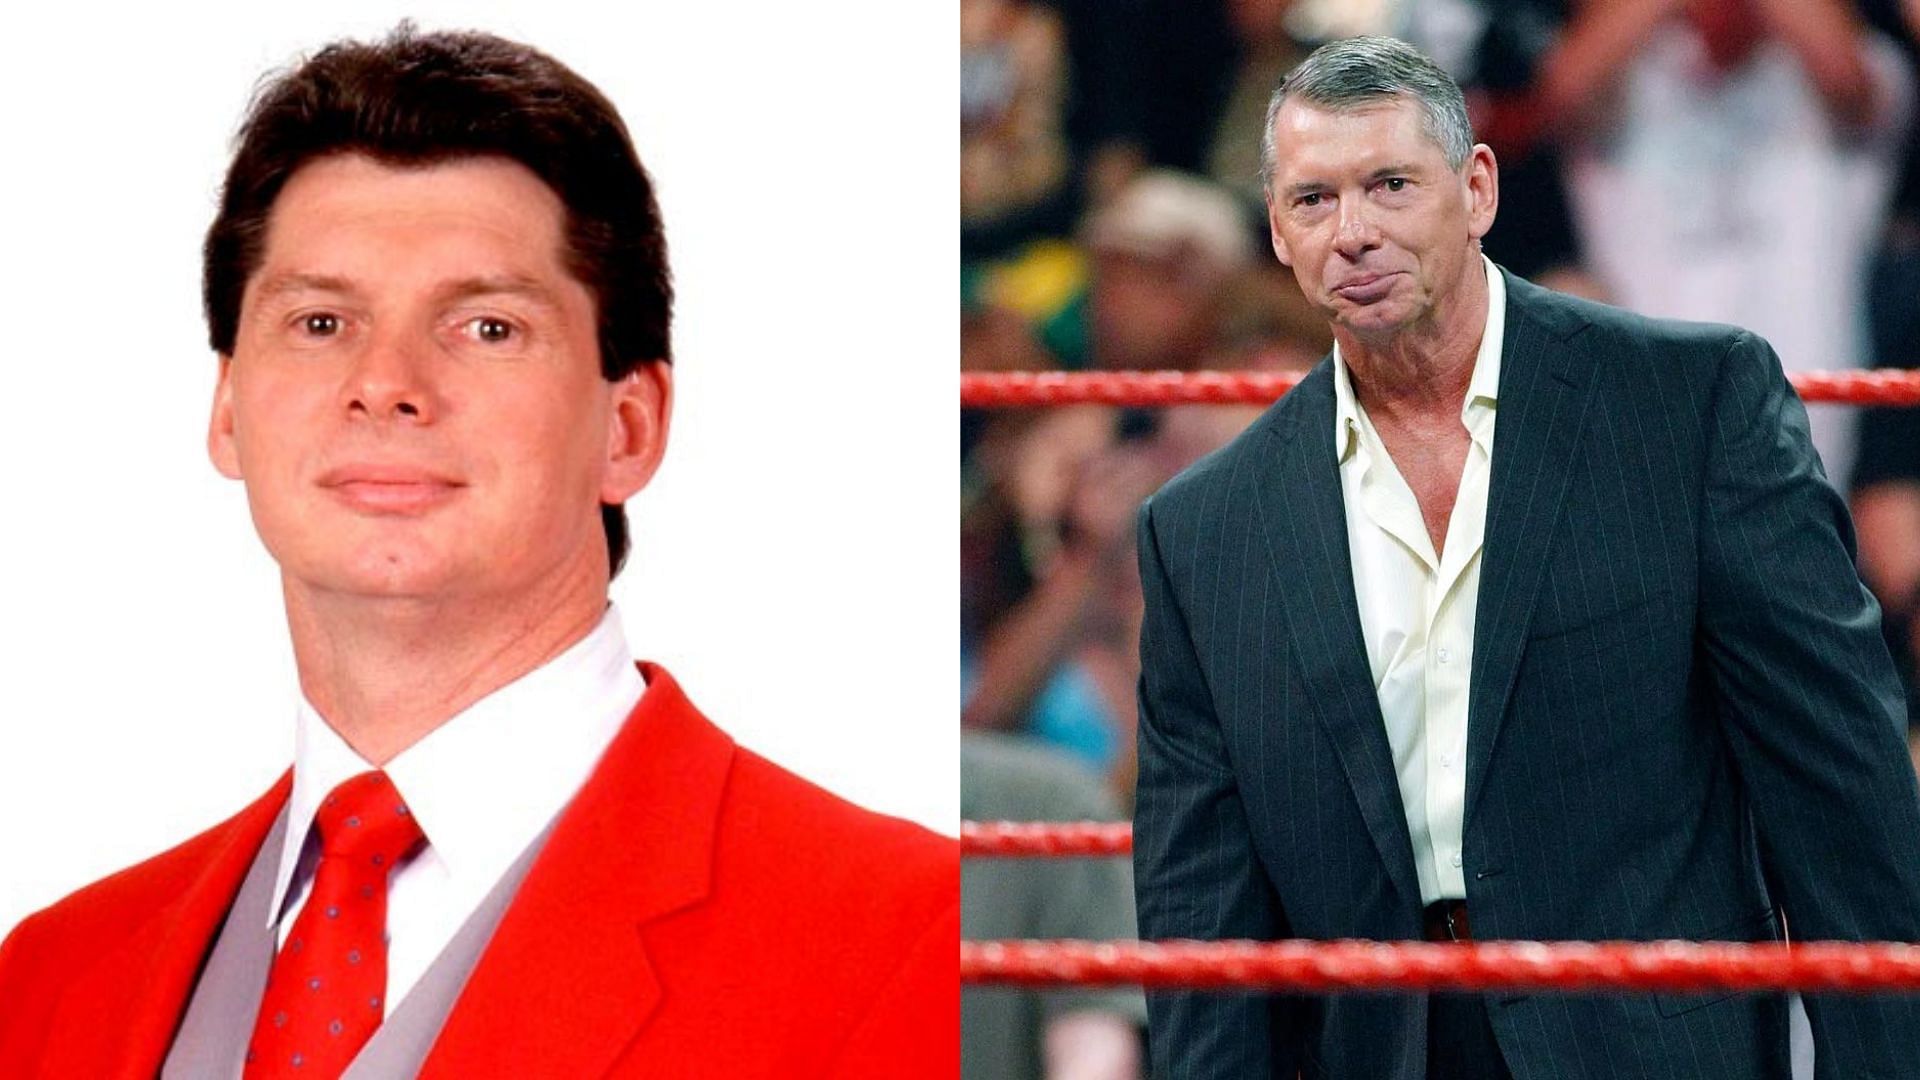 Vince McMahon began managing WWE at the age of 37